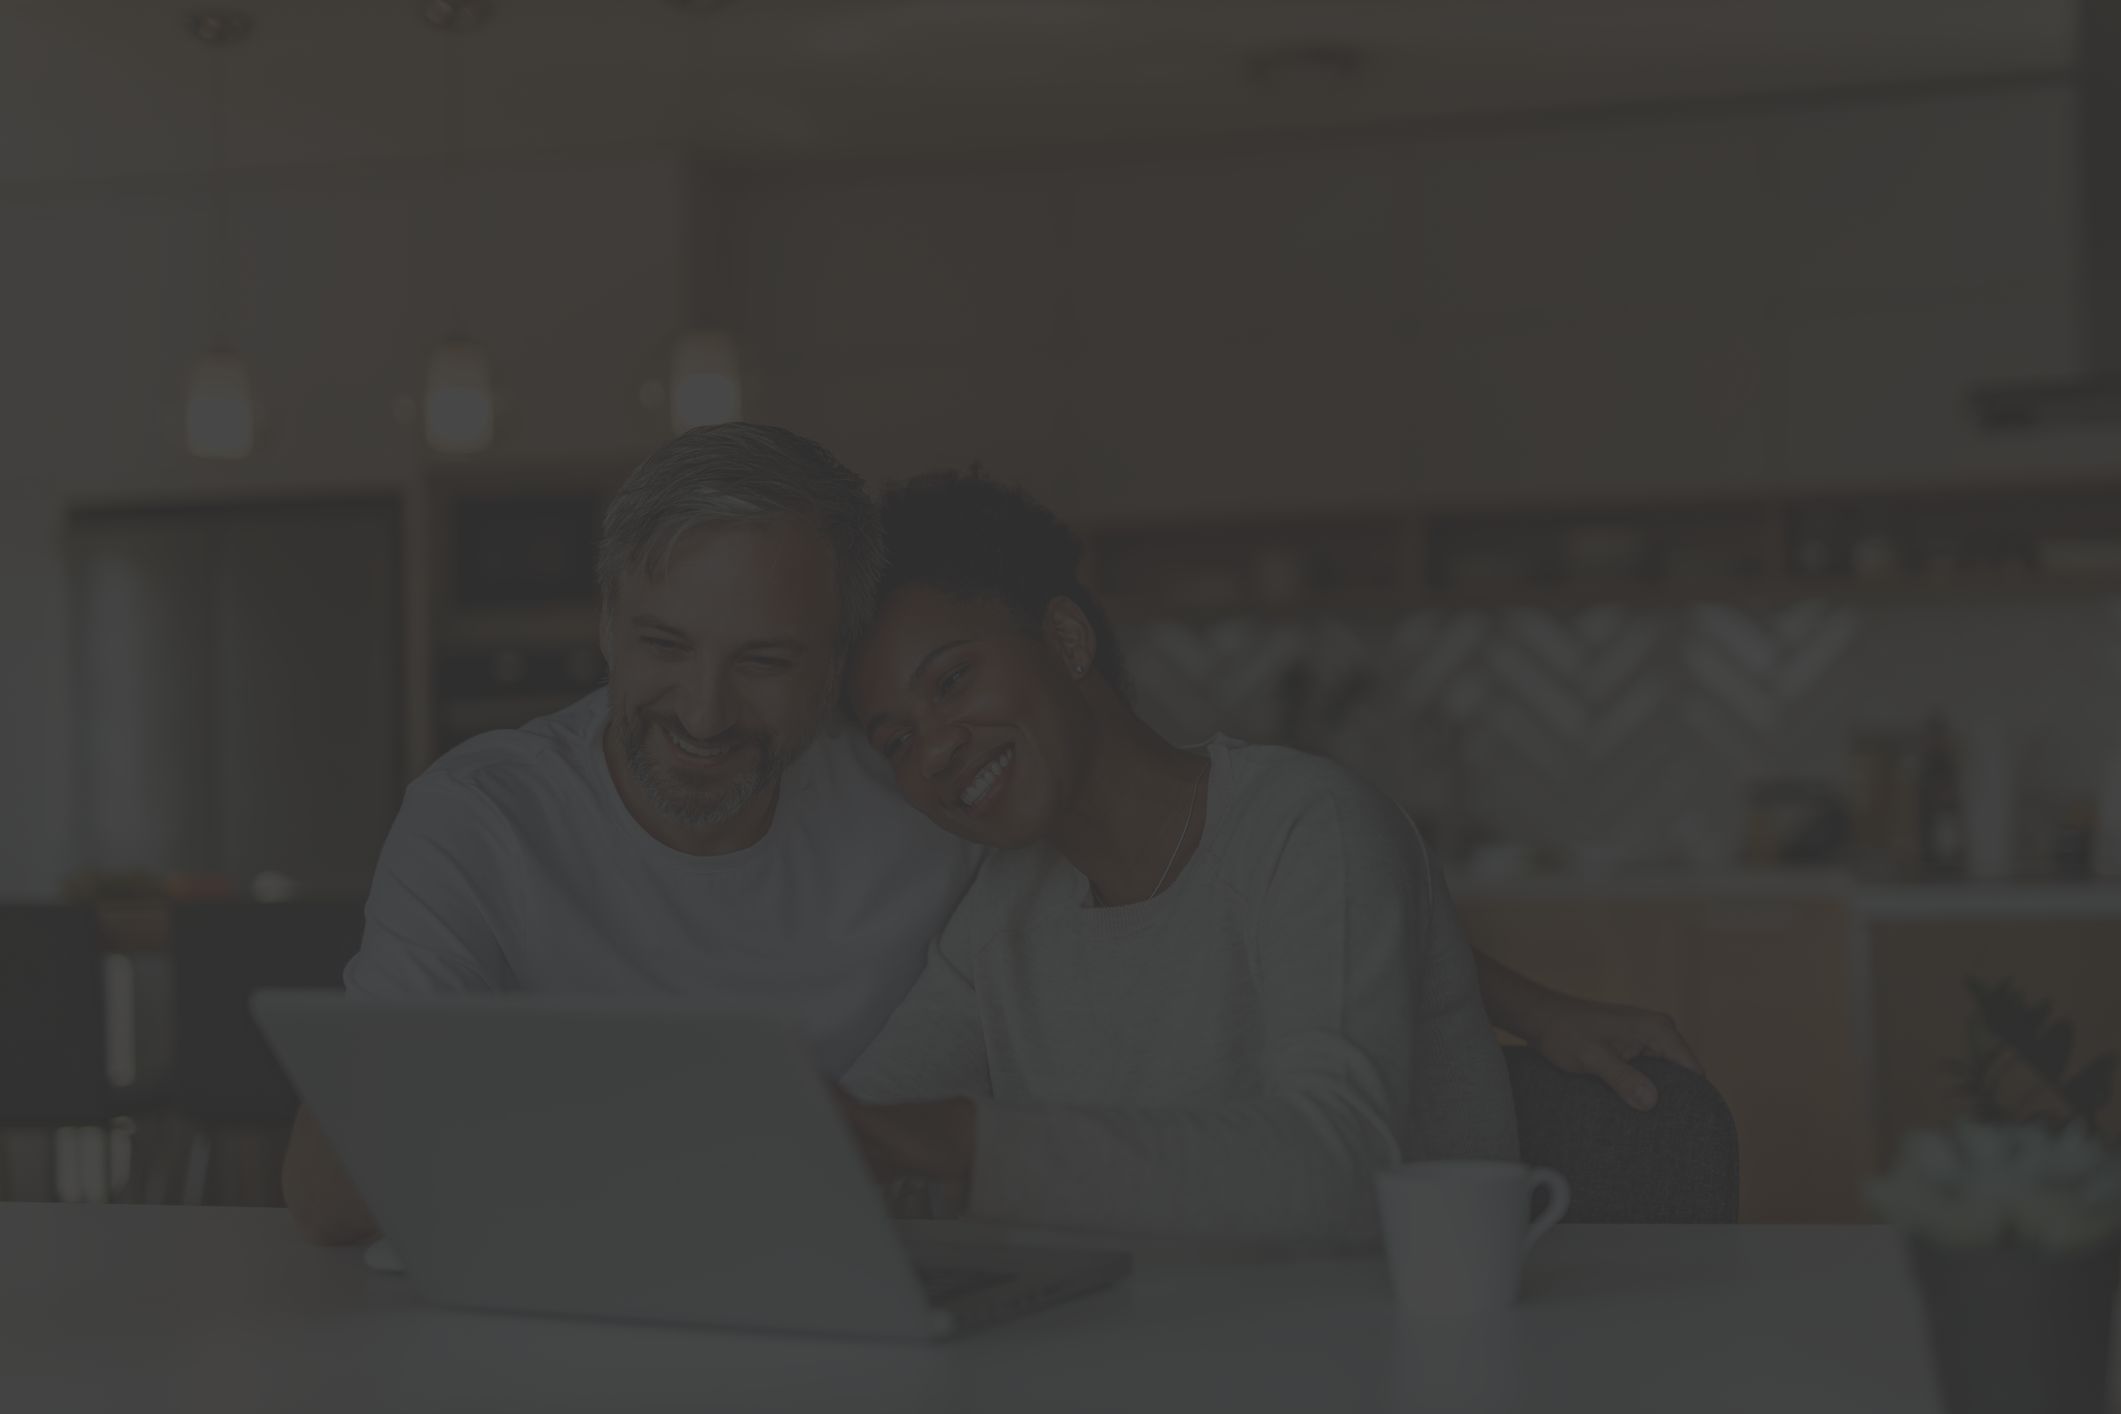 mixed-race middle aged couple sit happily at computer